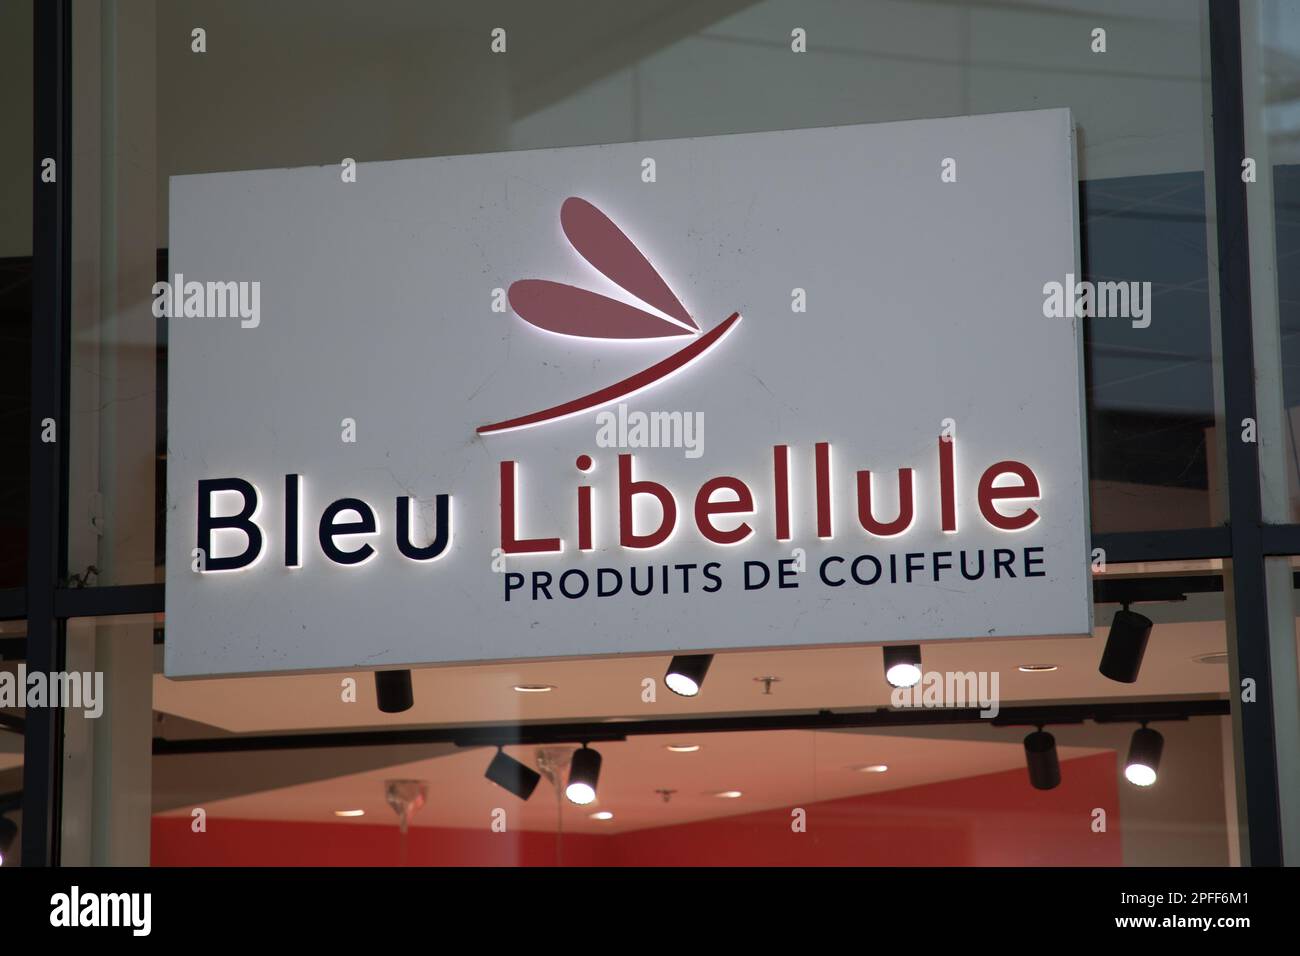 Bordeaux , Aquitaine  France - 03 15 2023 : Bleu Libellule logo brand and text sign front of shop cosmetics hairdresser care fashion products barber s Stock Photo